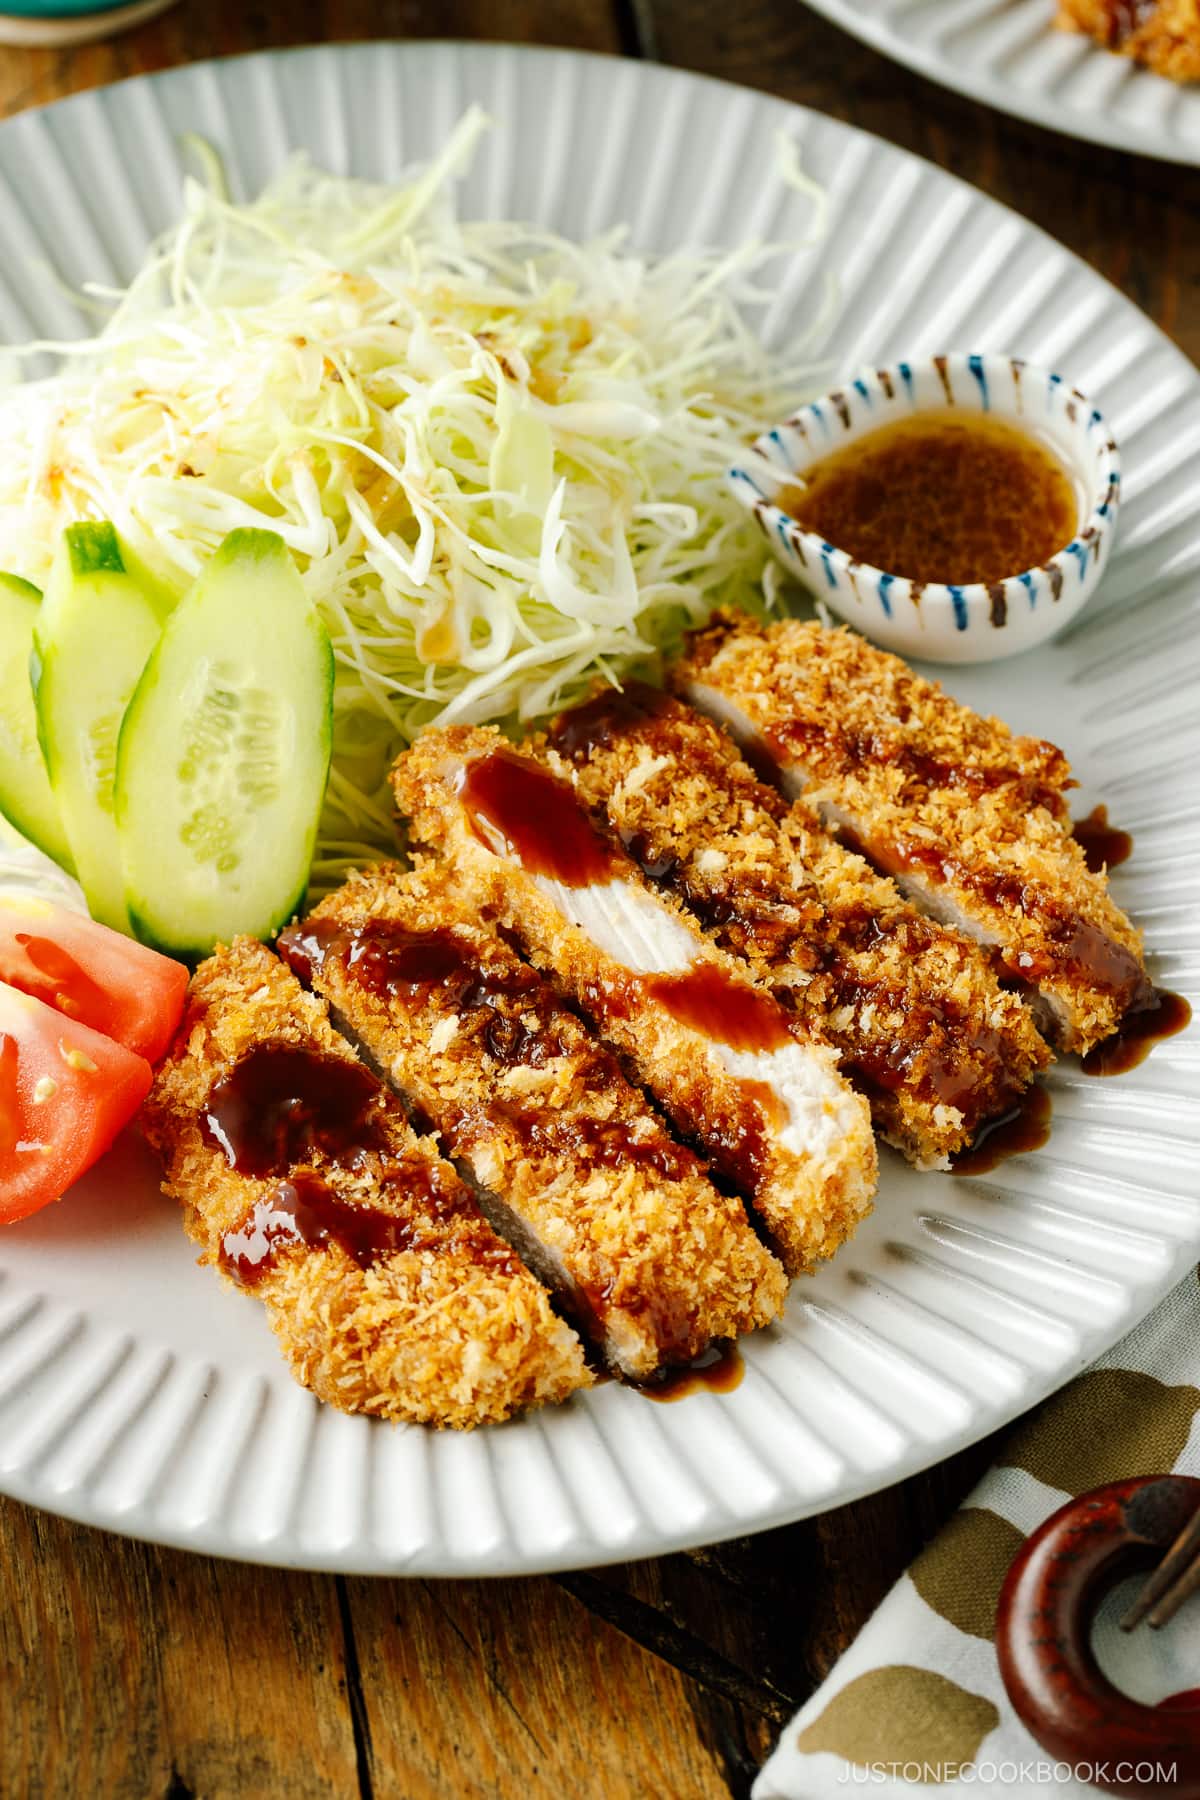 A fluted plate containing baked Tonkatsu drizzled with tonkatsu sauce, shredded cabbage, cucumber slices, and tomato wedges.